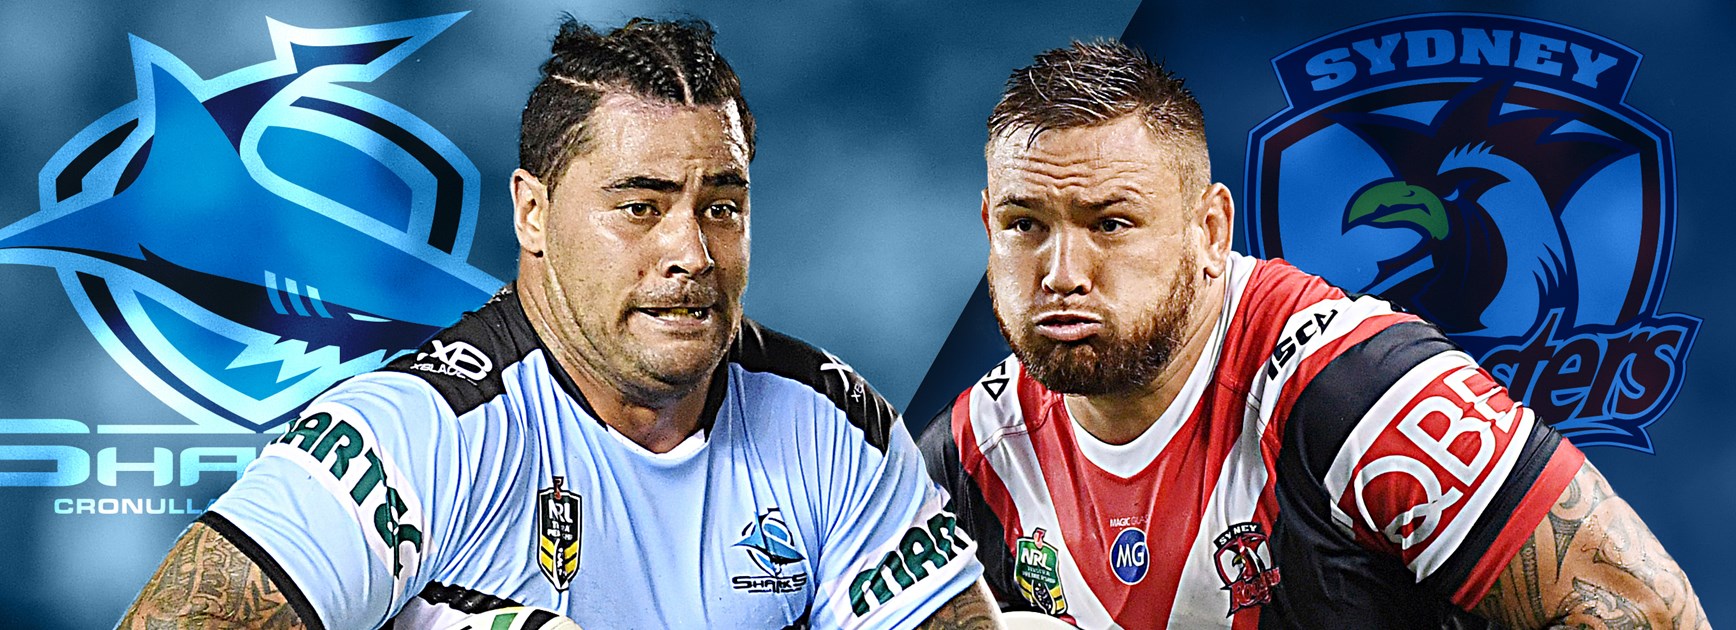 Sharks v Roosters: Dugan out, Moylan in, Chooks unchanged